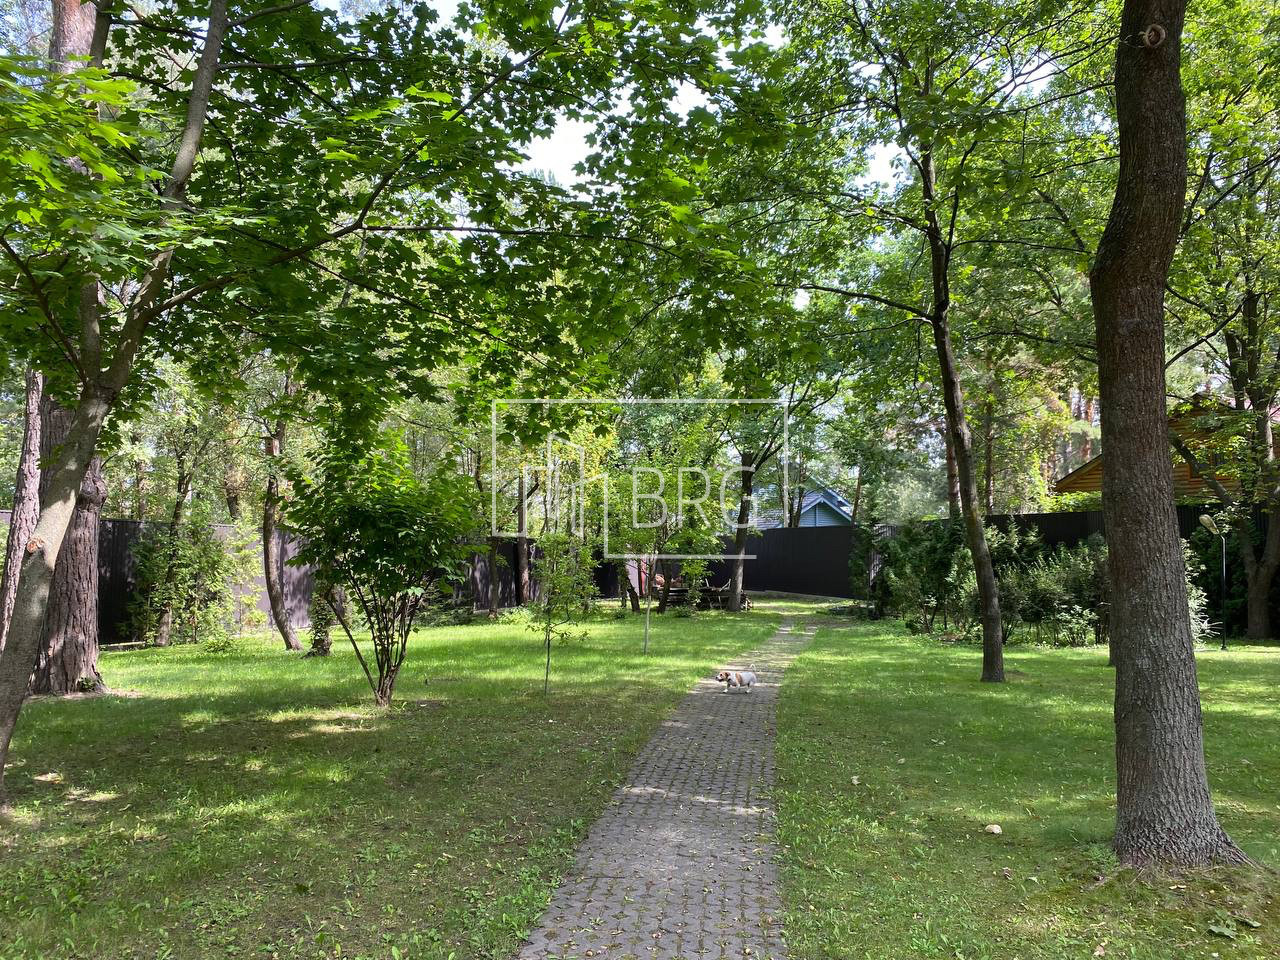 House 850m in Rudyki with a guest house and a sauna complex on the territory. Kiev region